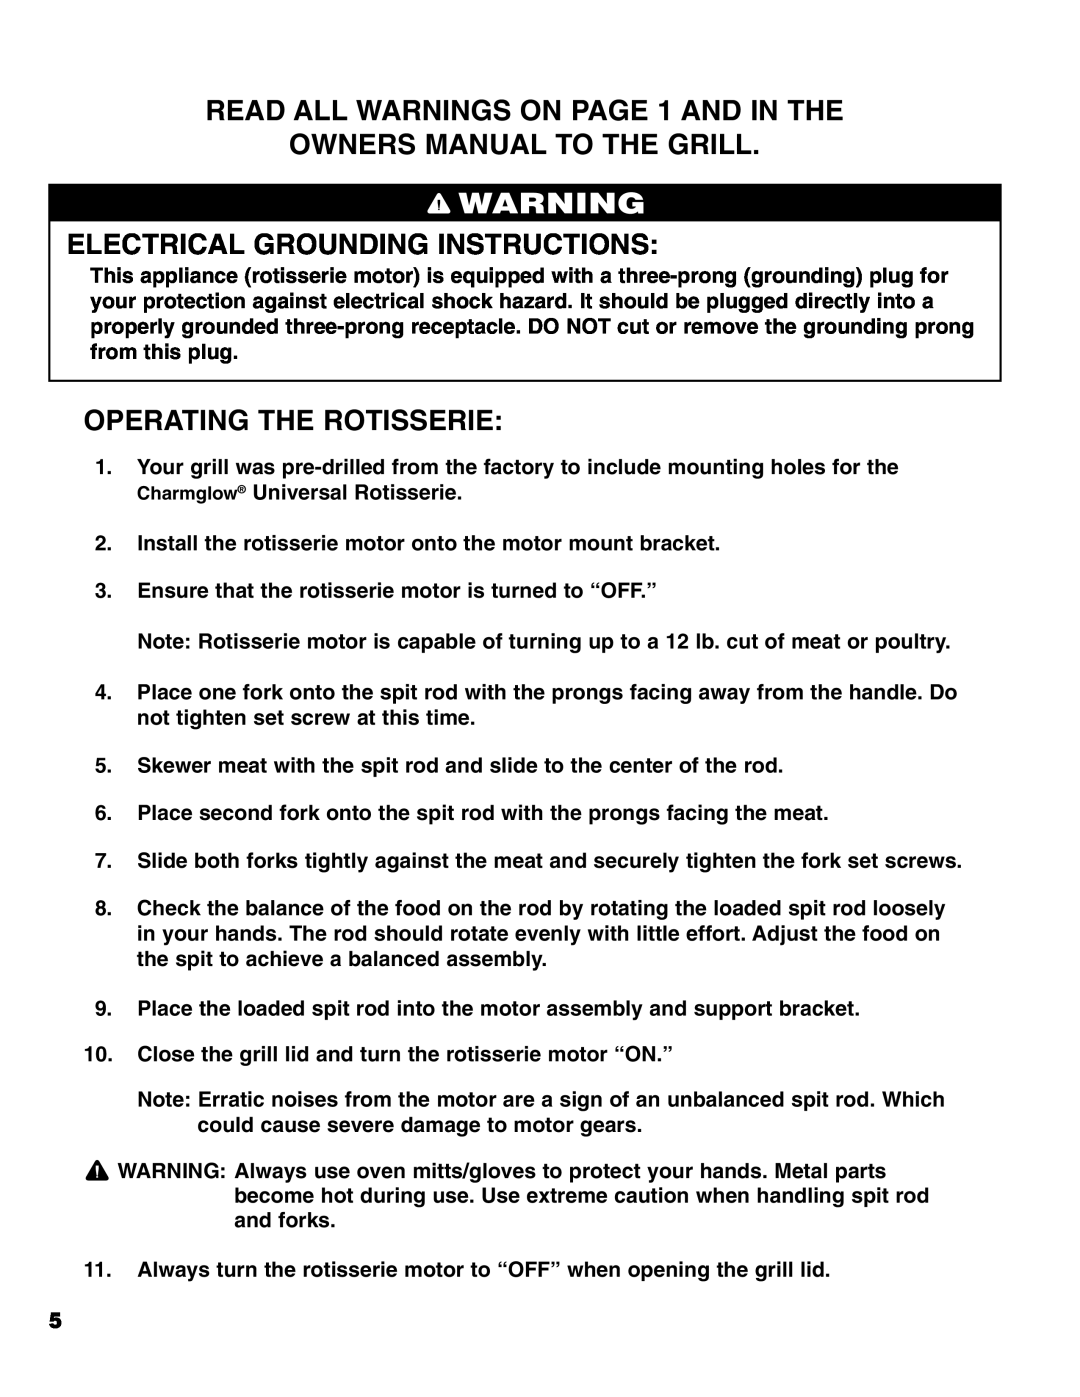 Brinkmann Universal Rotisserie manual Operating The Rotisserie, Electrical Grounding Instructions 